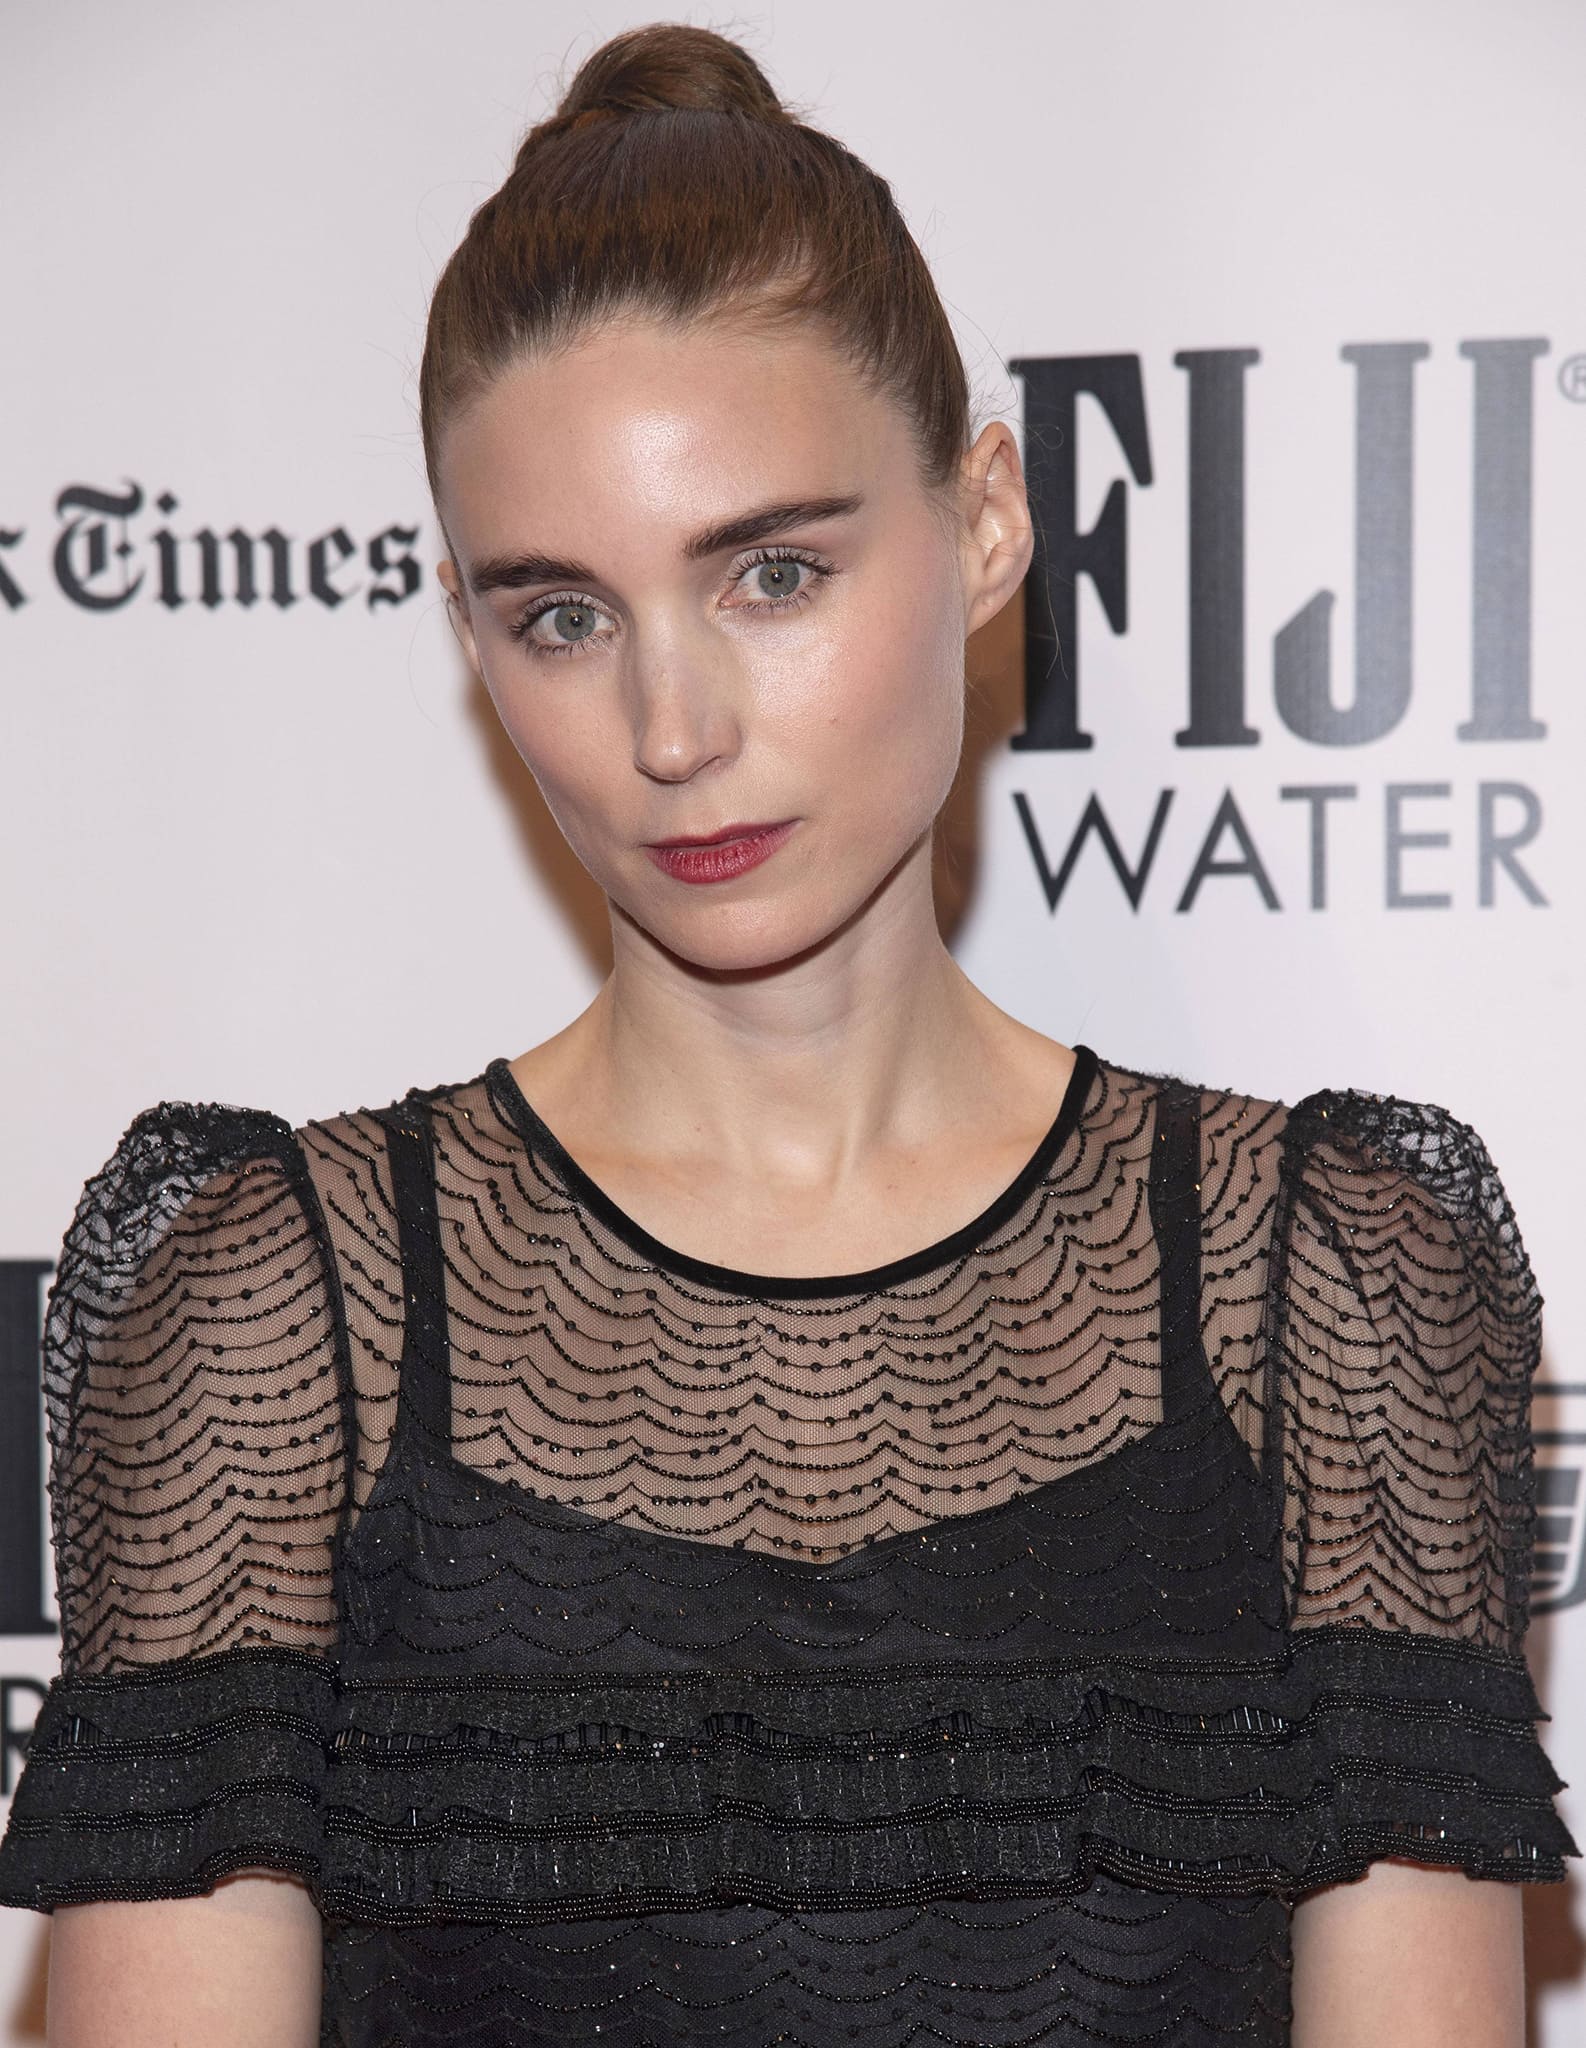 Rooney Mara wears a tight bun and highlights her features with mascara, blush, and red lipstick